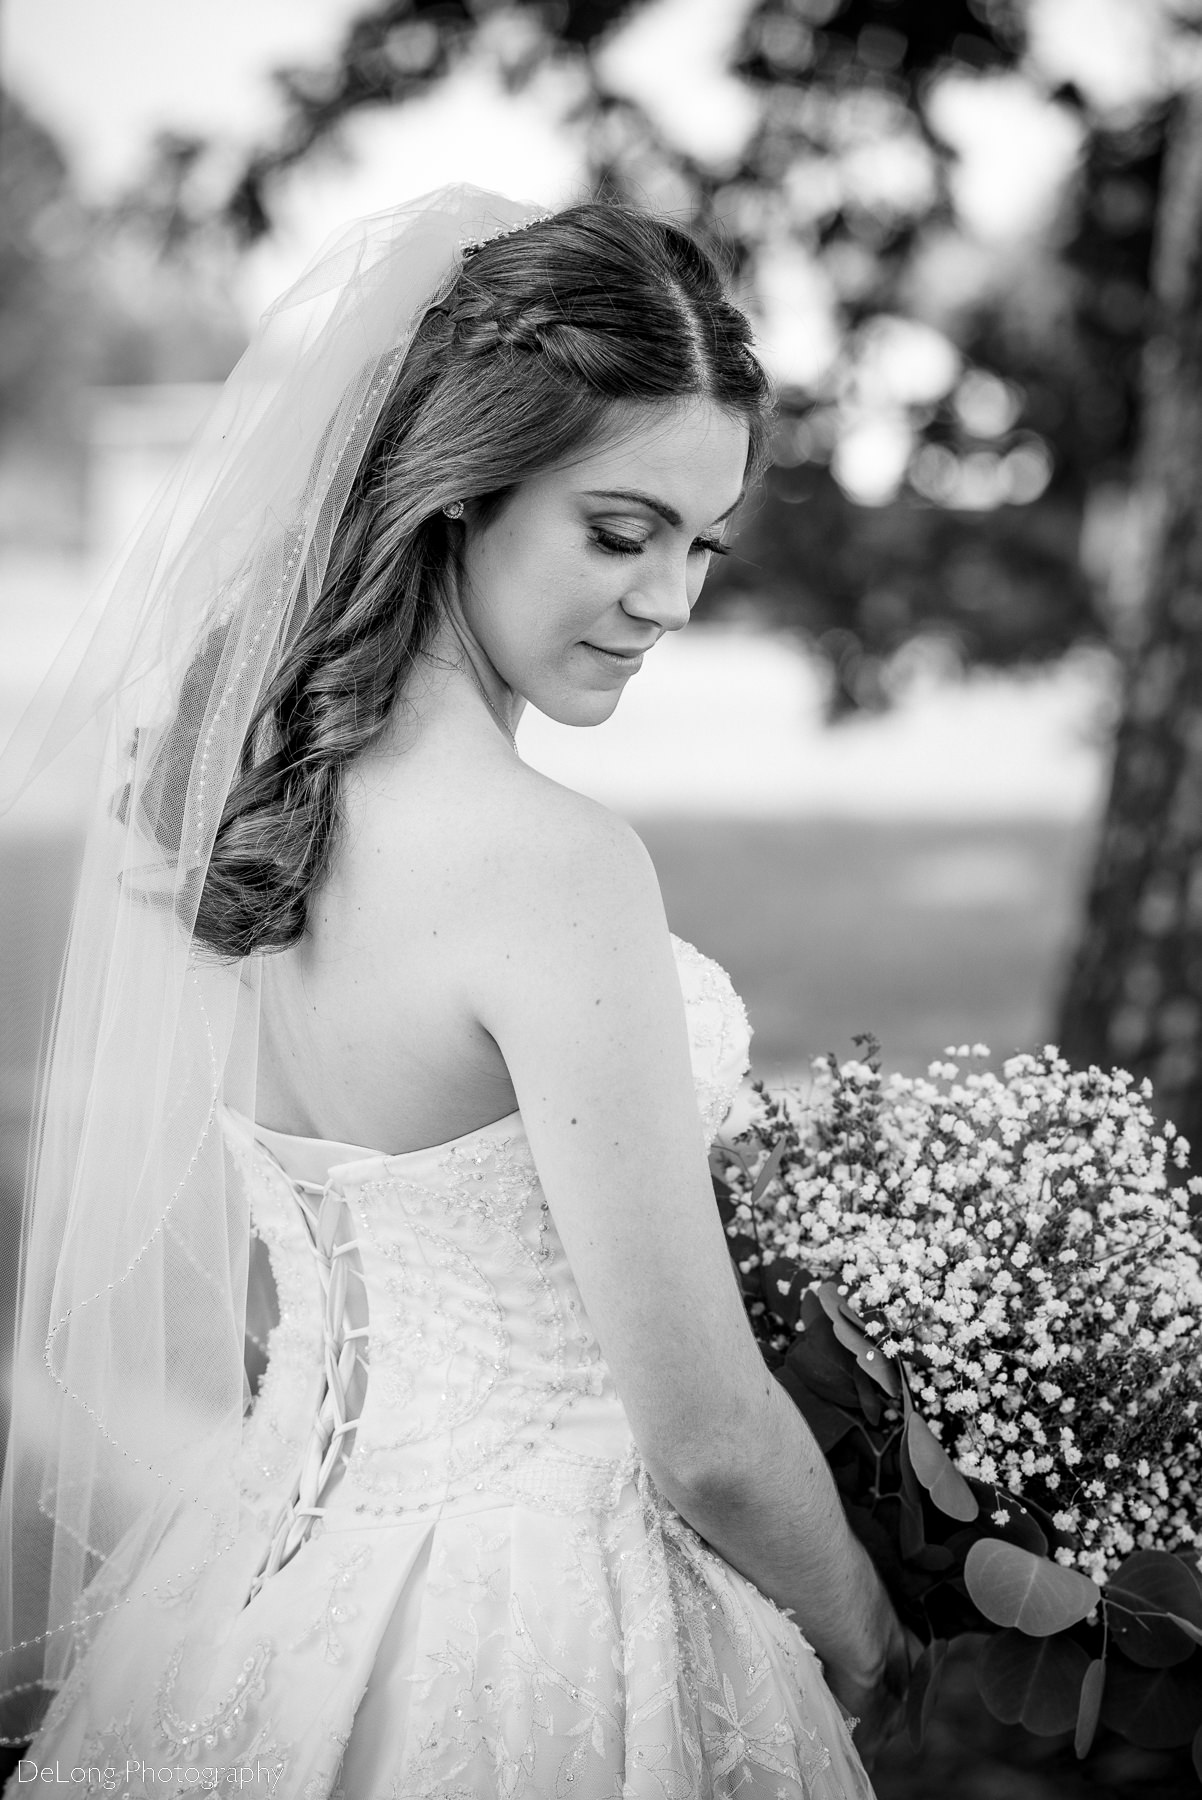 Black and white bridal portrait of bride showing off the back of her dress and veil by Charlotte Wedding Photographers DeLong Photography